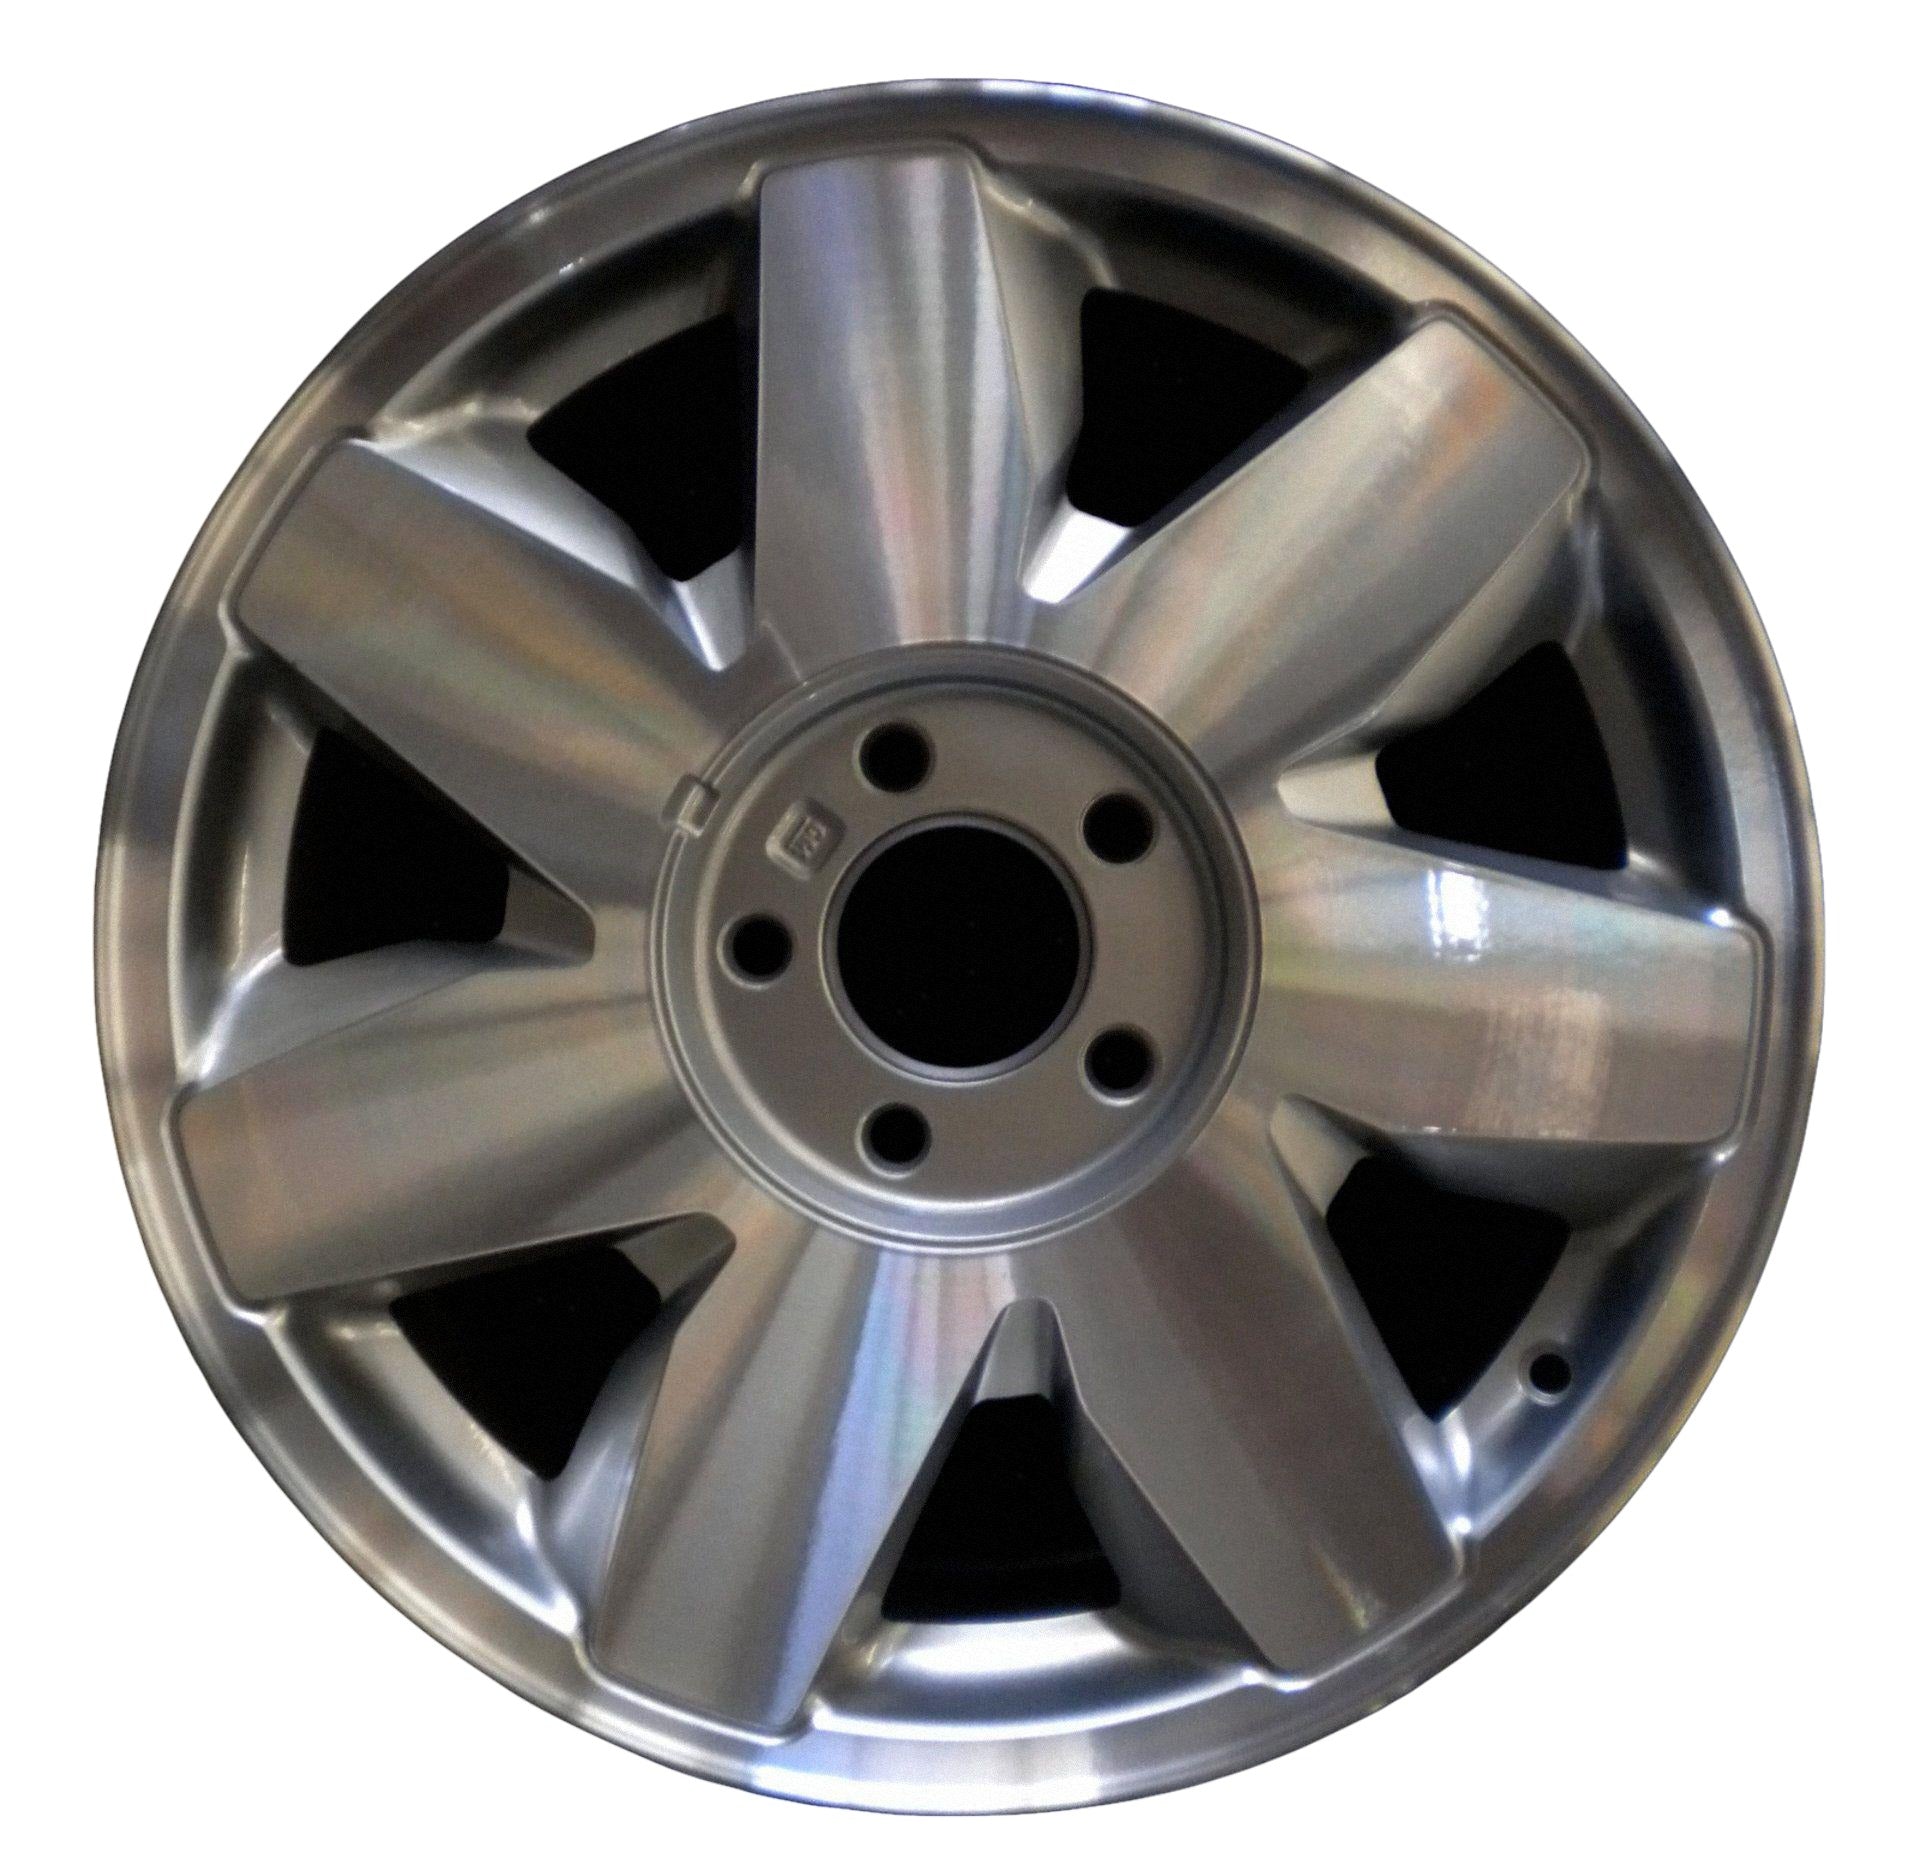 Cadillac Deville  2003, 2004, 2005 Factory OEM Car Wheel Size 17x7.5 Alloy WAO.4571.PS01.MA